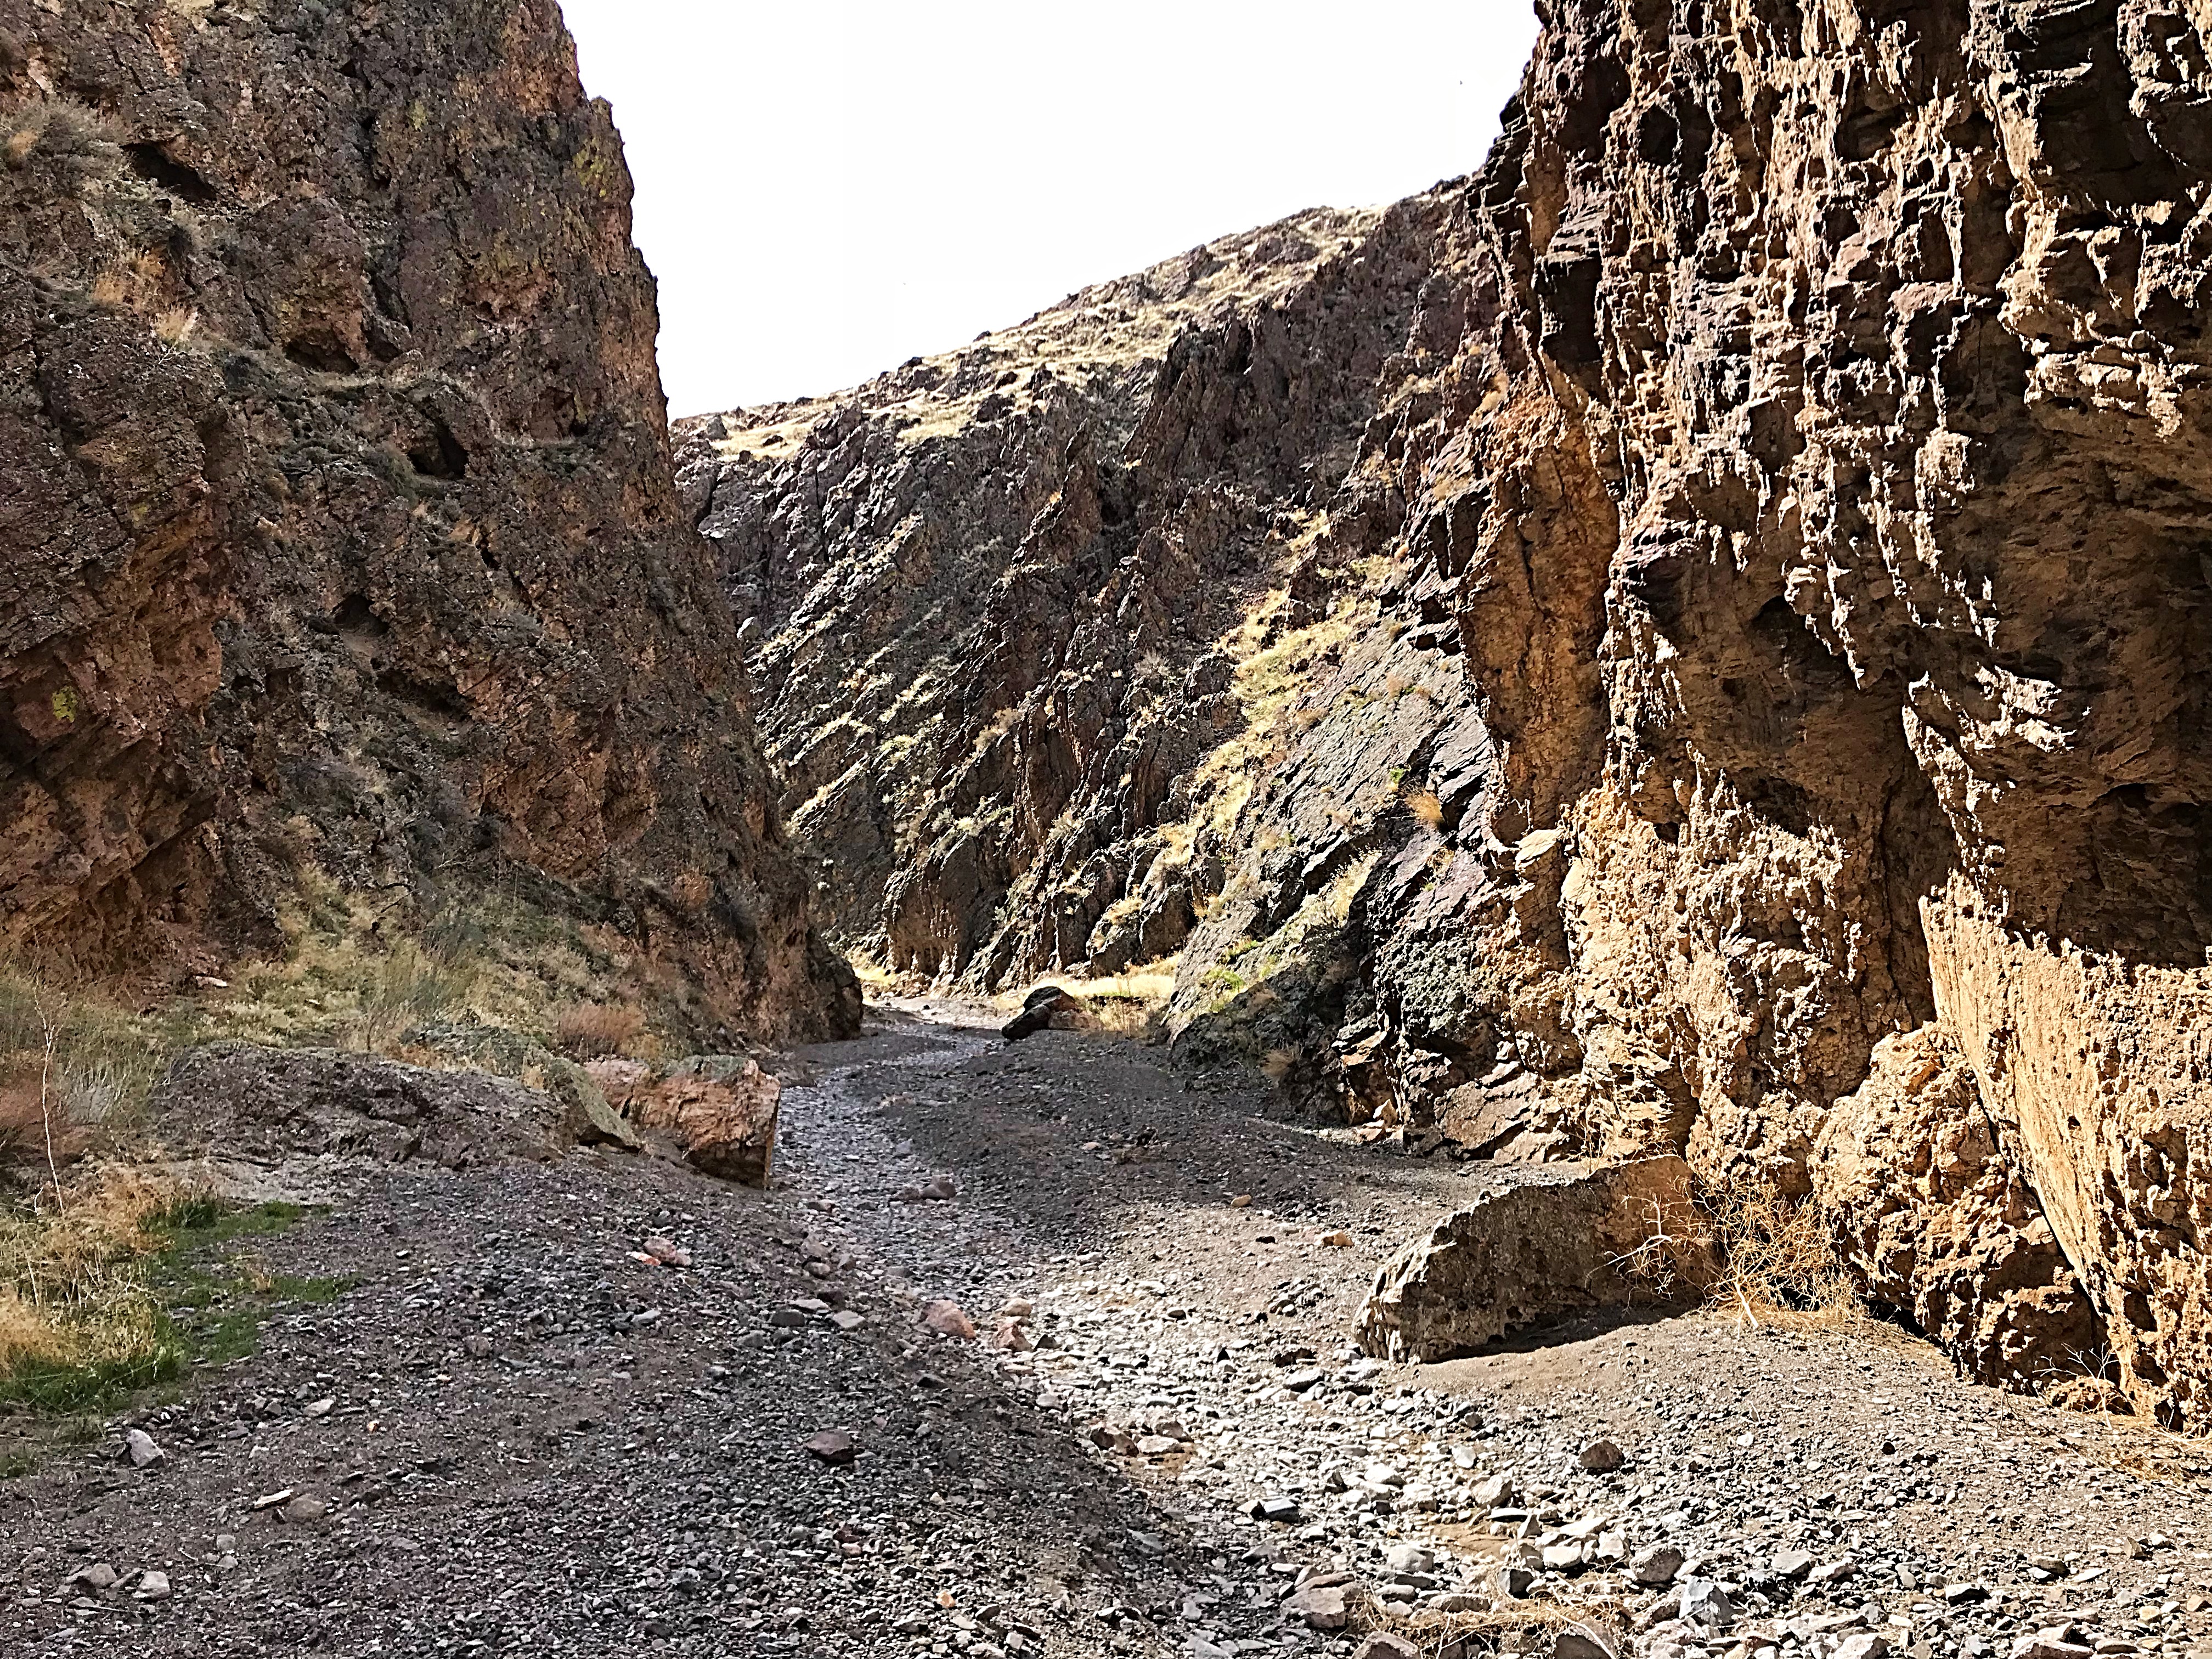 Hardtrigger Canyon’s walls are made up of hard pockmarked volcanic rock.